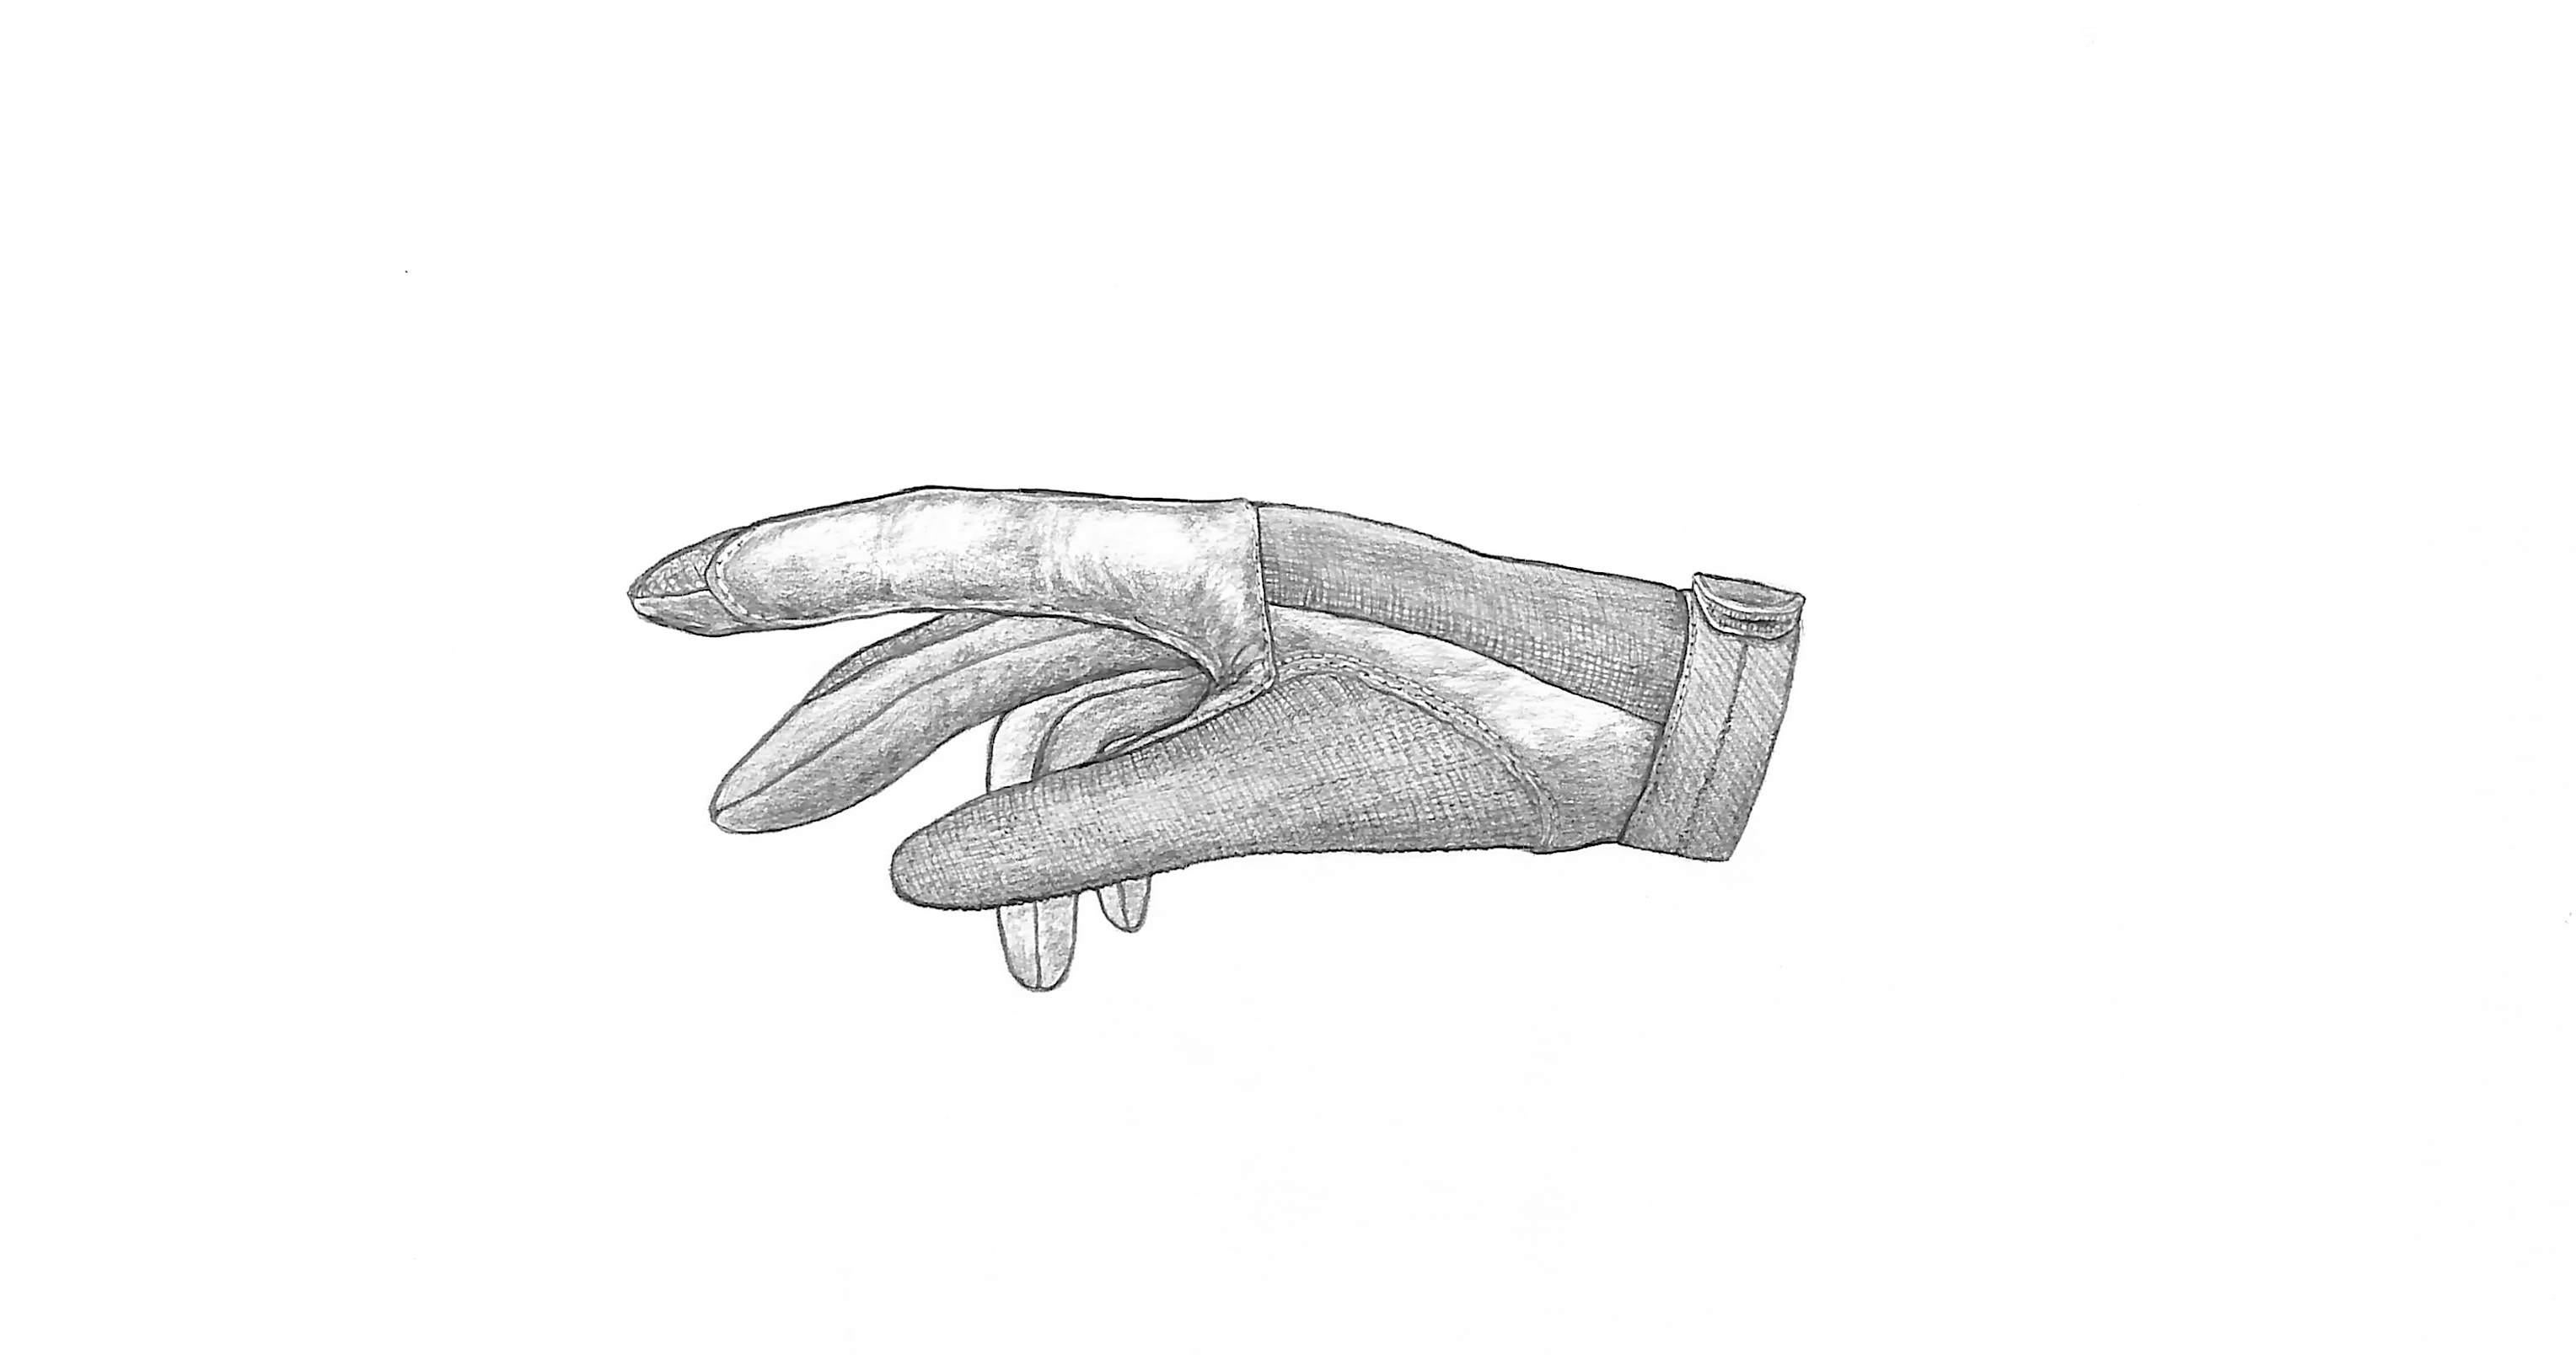 Eastern Leather Spandex (Brown) Glove 2002 Graphite Drawing - Art by Unknown